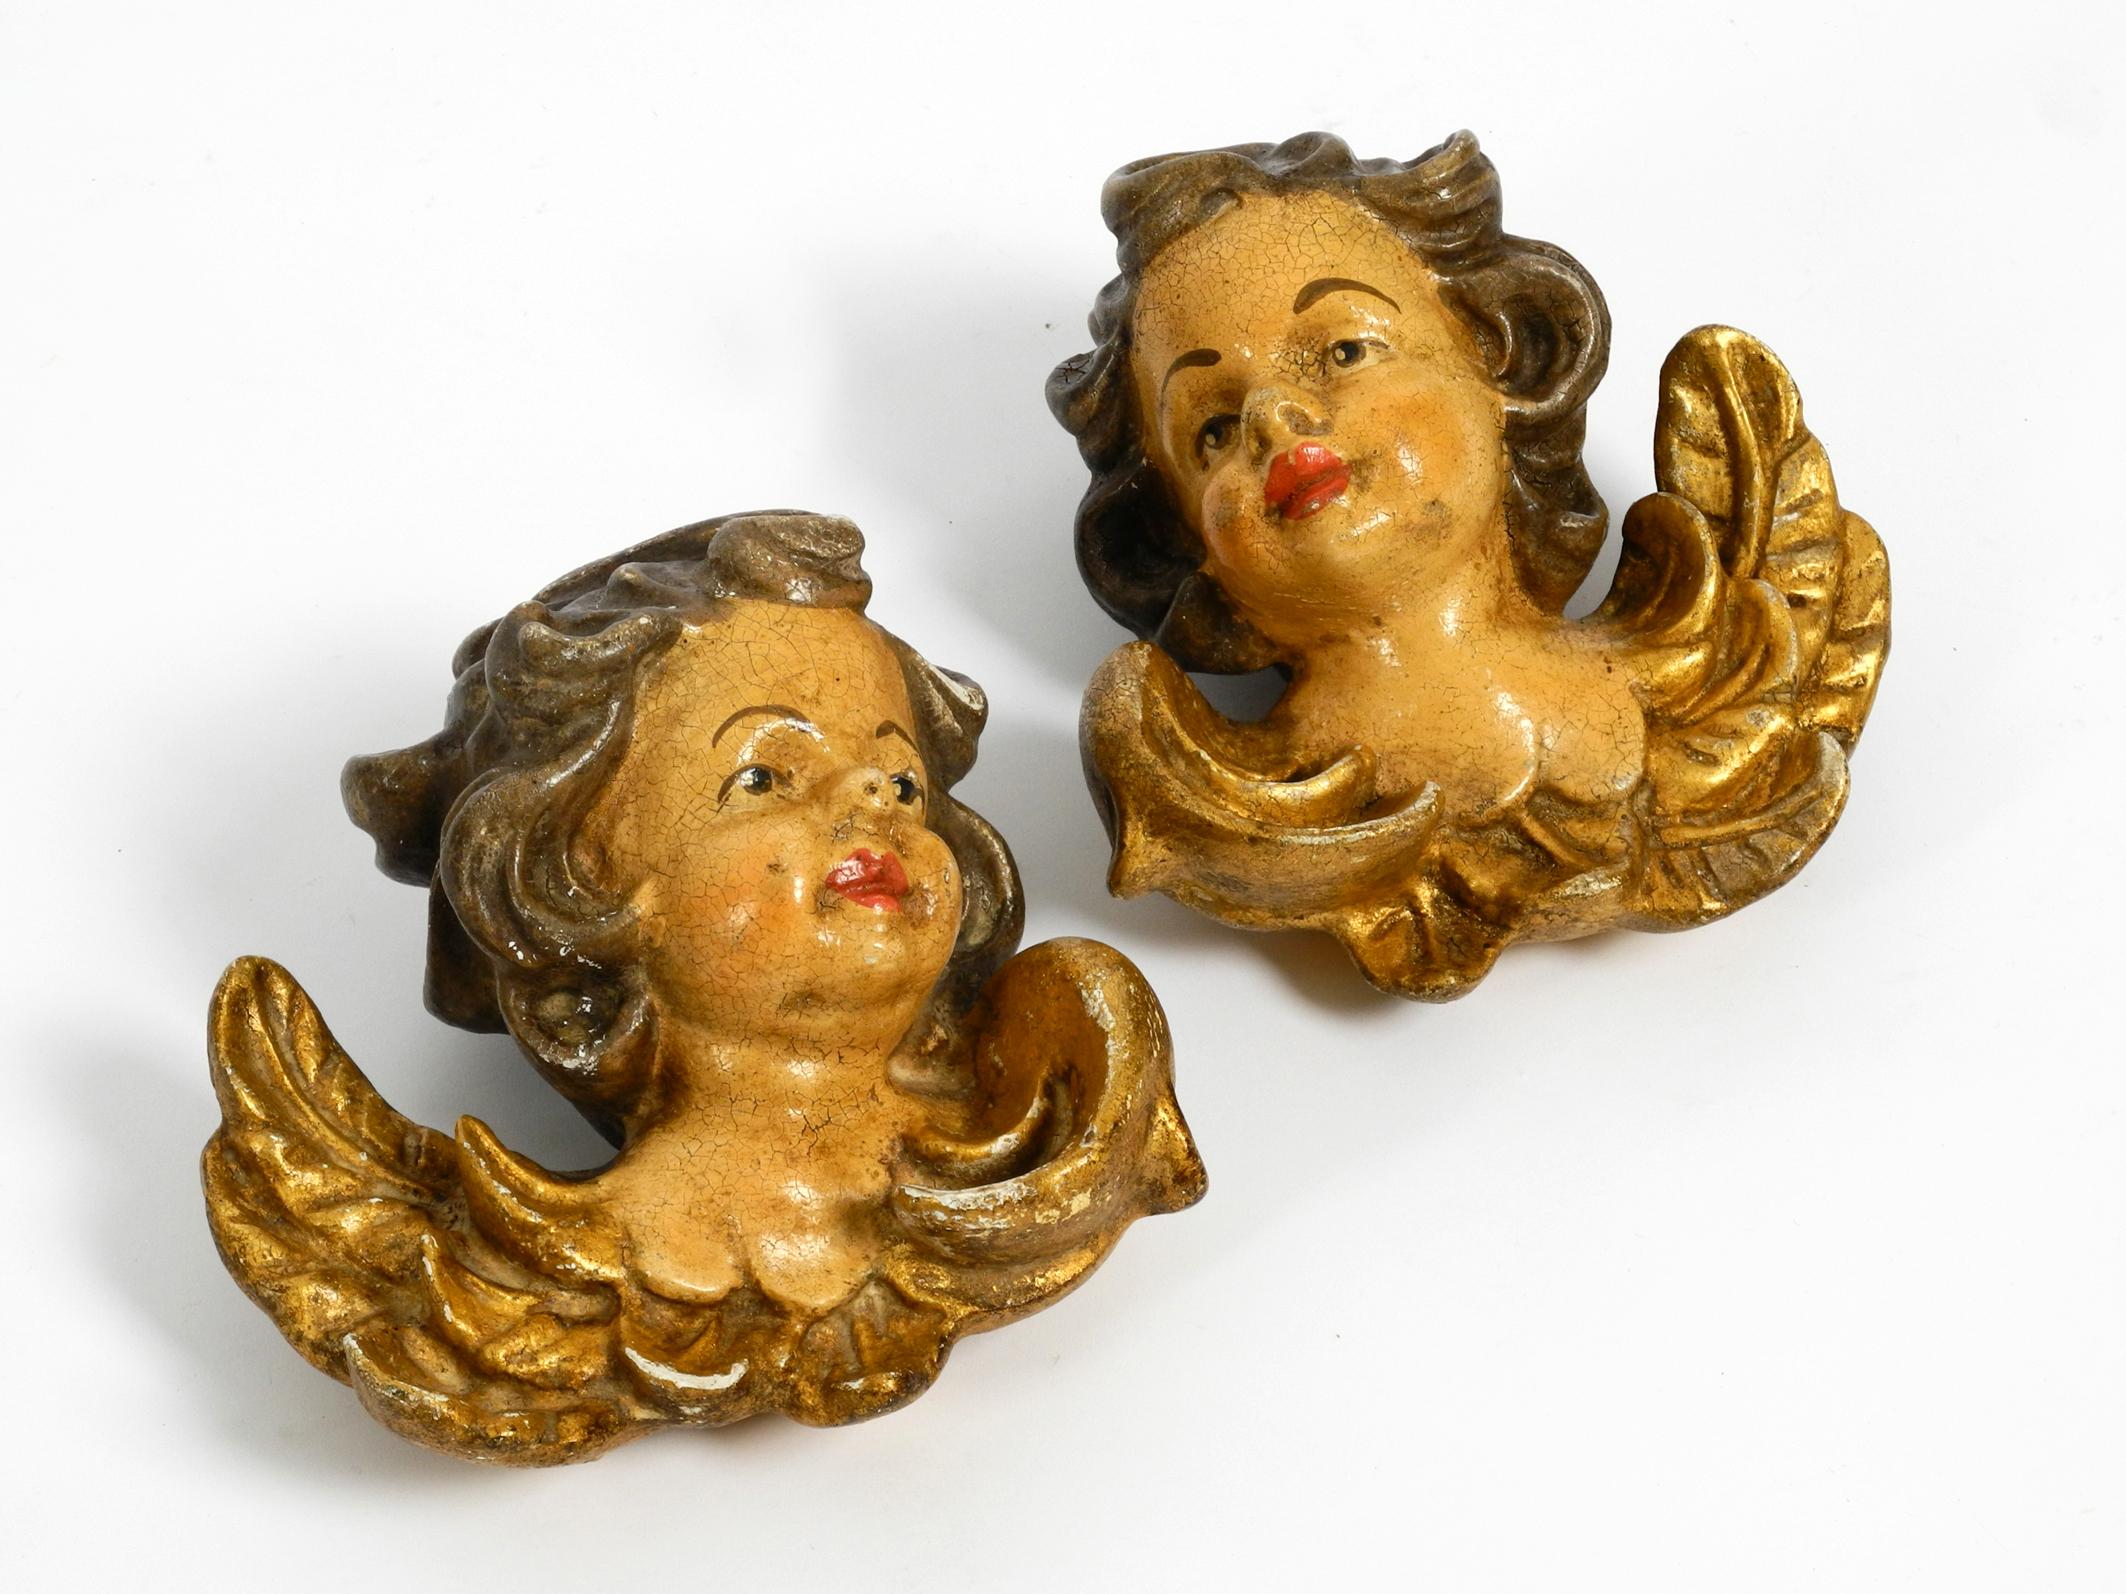 2 lovely little handmade wooden angel heads from the 1930s.
Fantastic wall decoration from Italy, made by hand and painted.
Very high quality with many details. Partly gilded.
With very nice patina, clearly recognizable from the